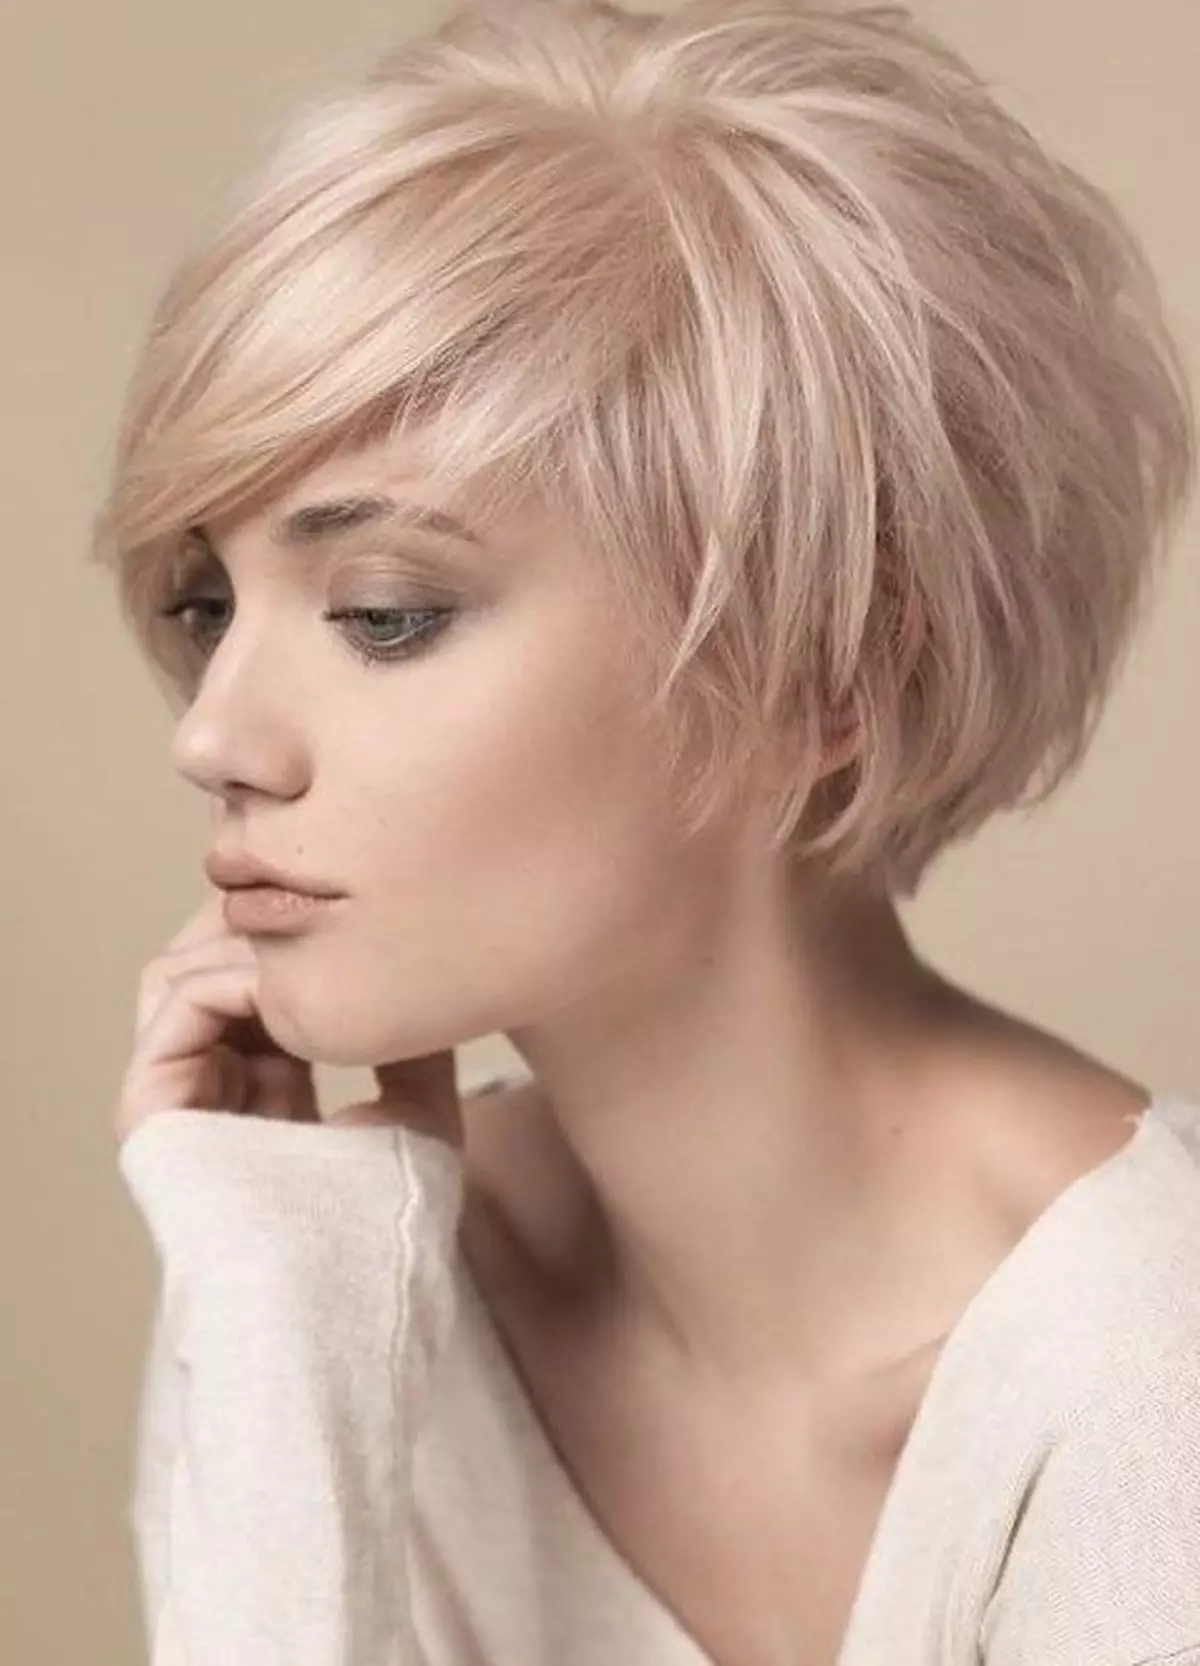 Fashionable Women's Haircuts 2021 (58 Photos): Modern Trends and Novelties Haircuts For Women 79_33